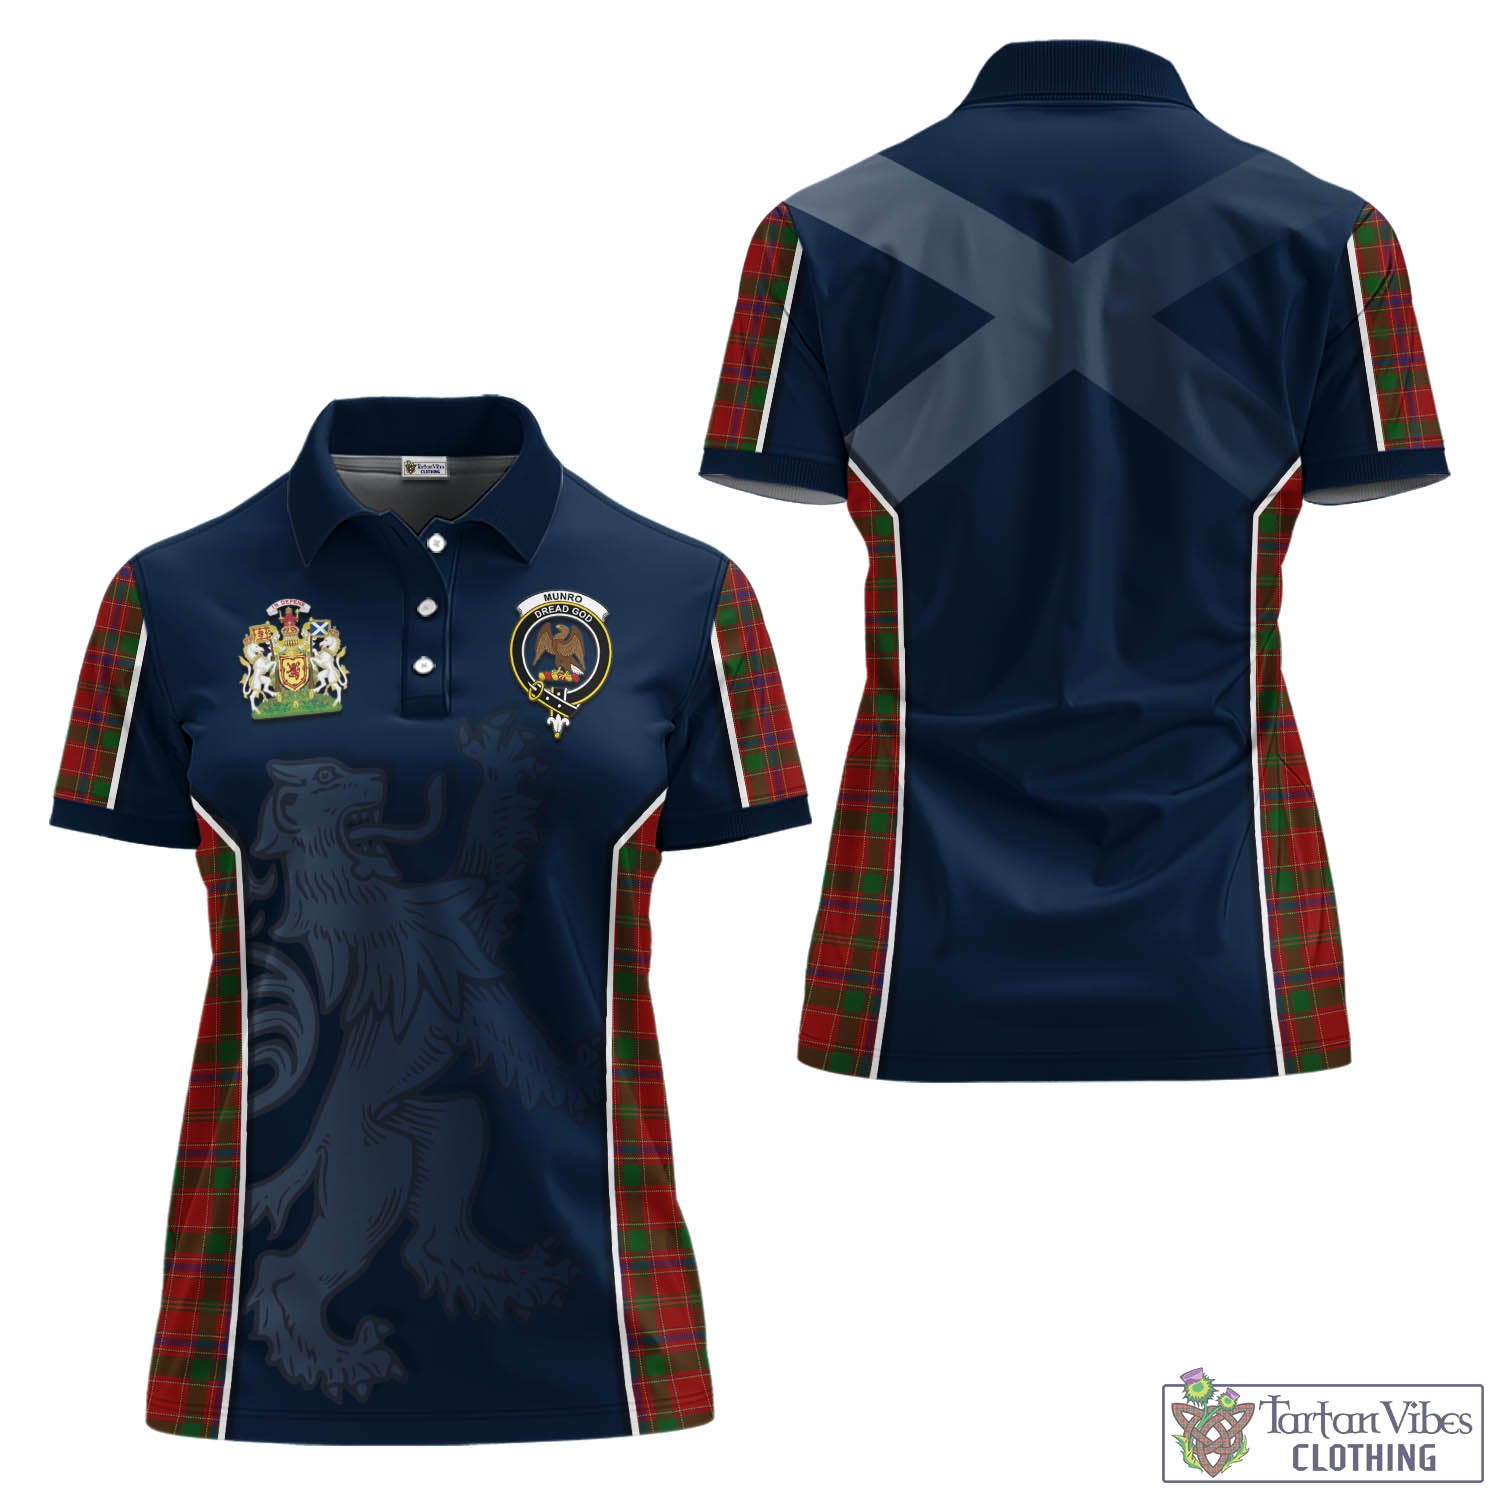 Tartan Vibes Clothing Munro Tartan Women's Polo Shirt with Family Crest and Lion Rampant Vibes Sport Style